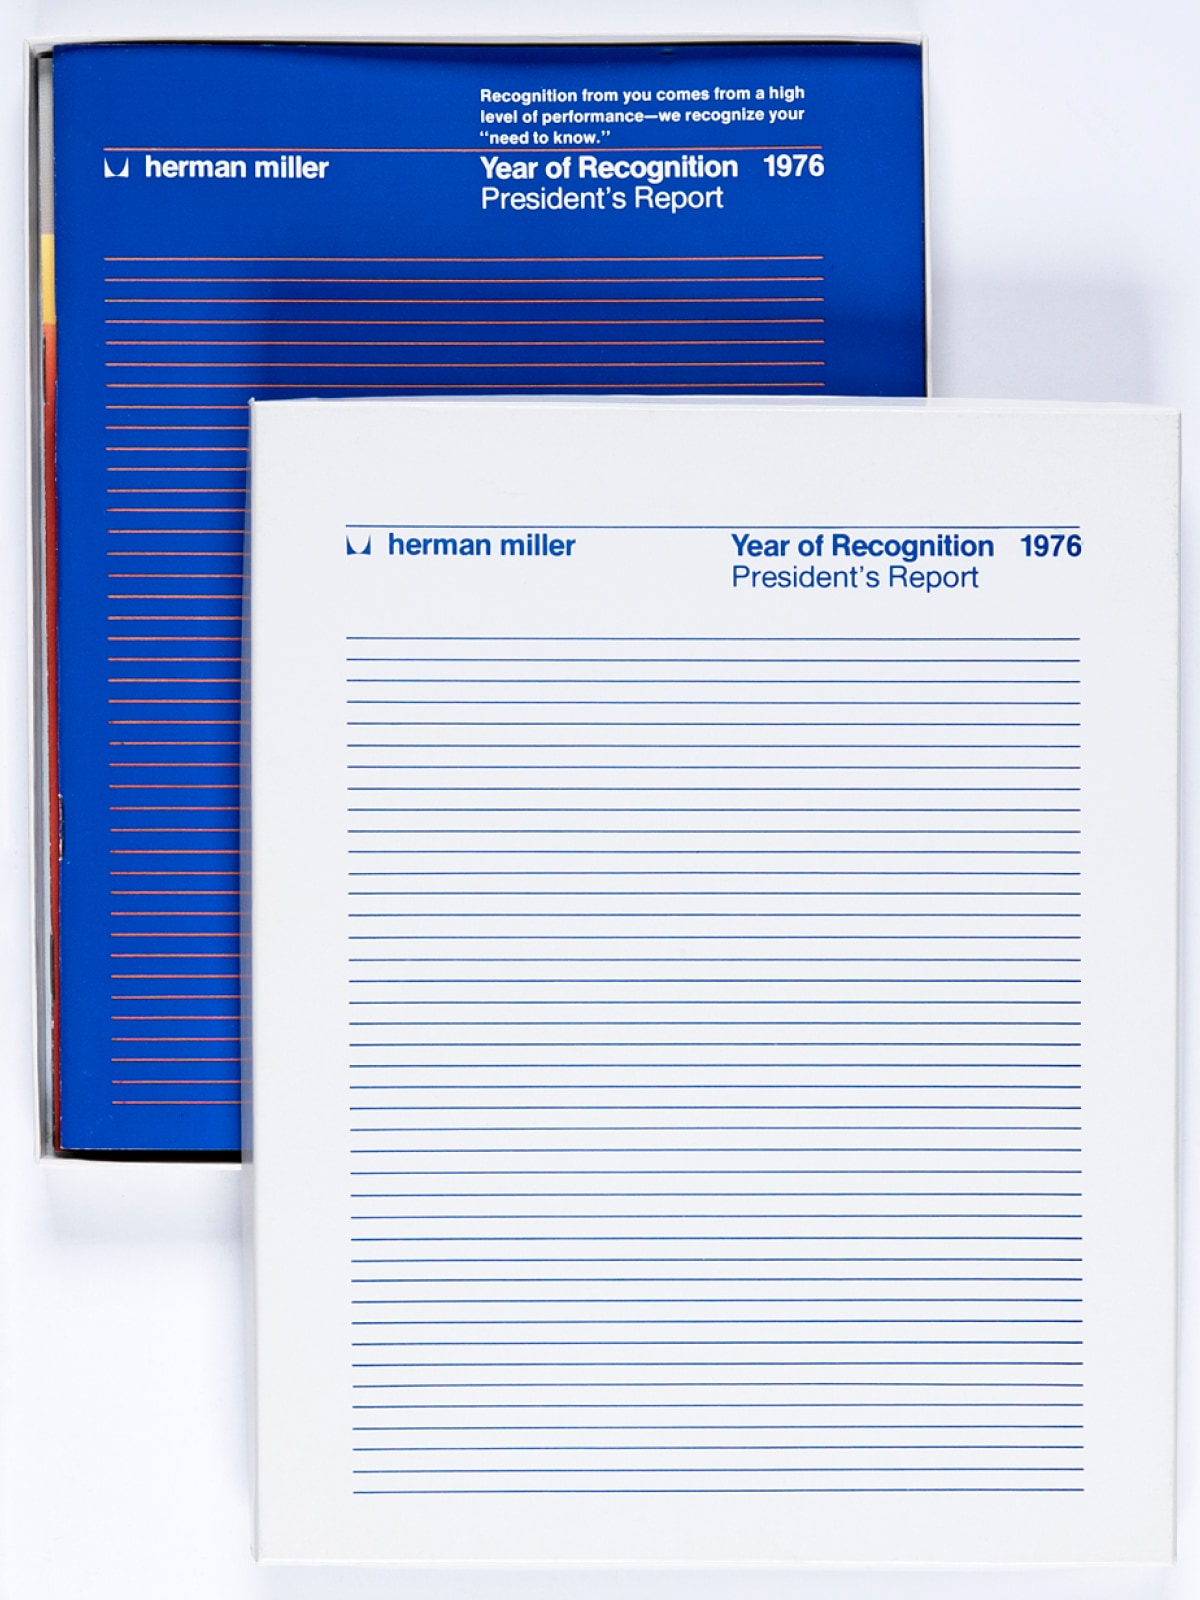 On the left, covers of two Herman Miller reports, one that has blue lines on a white background and the other has red lines on a blue background. On the right, a Herman Miller report cover featuring a blue Ergon chair.